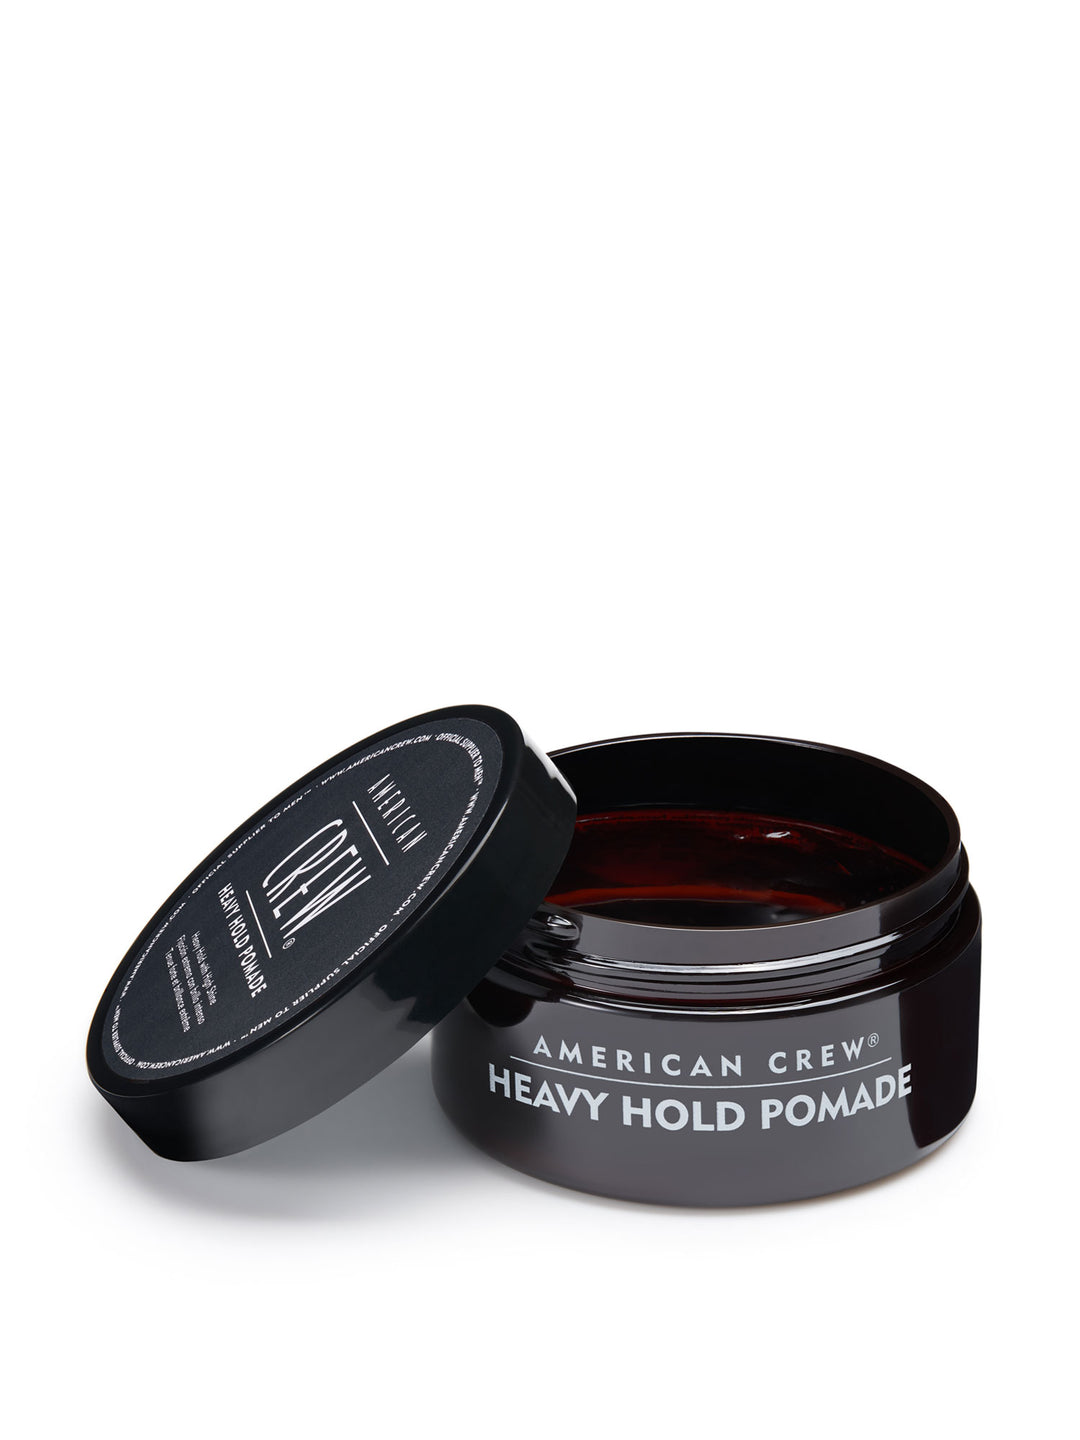 Styling Cream, Pomade, Products American Gel, Crew Hair Hair - and